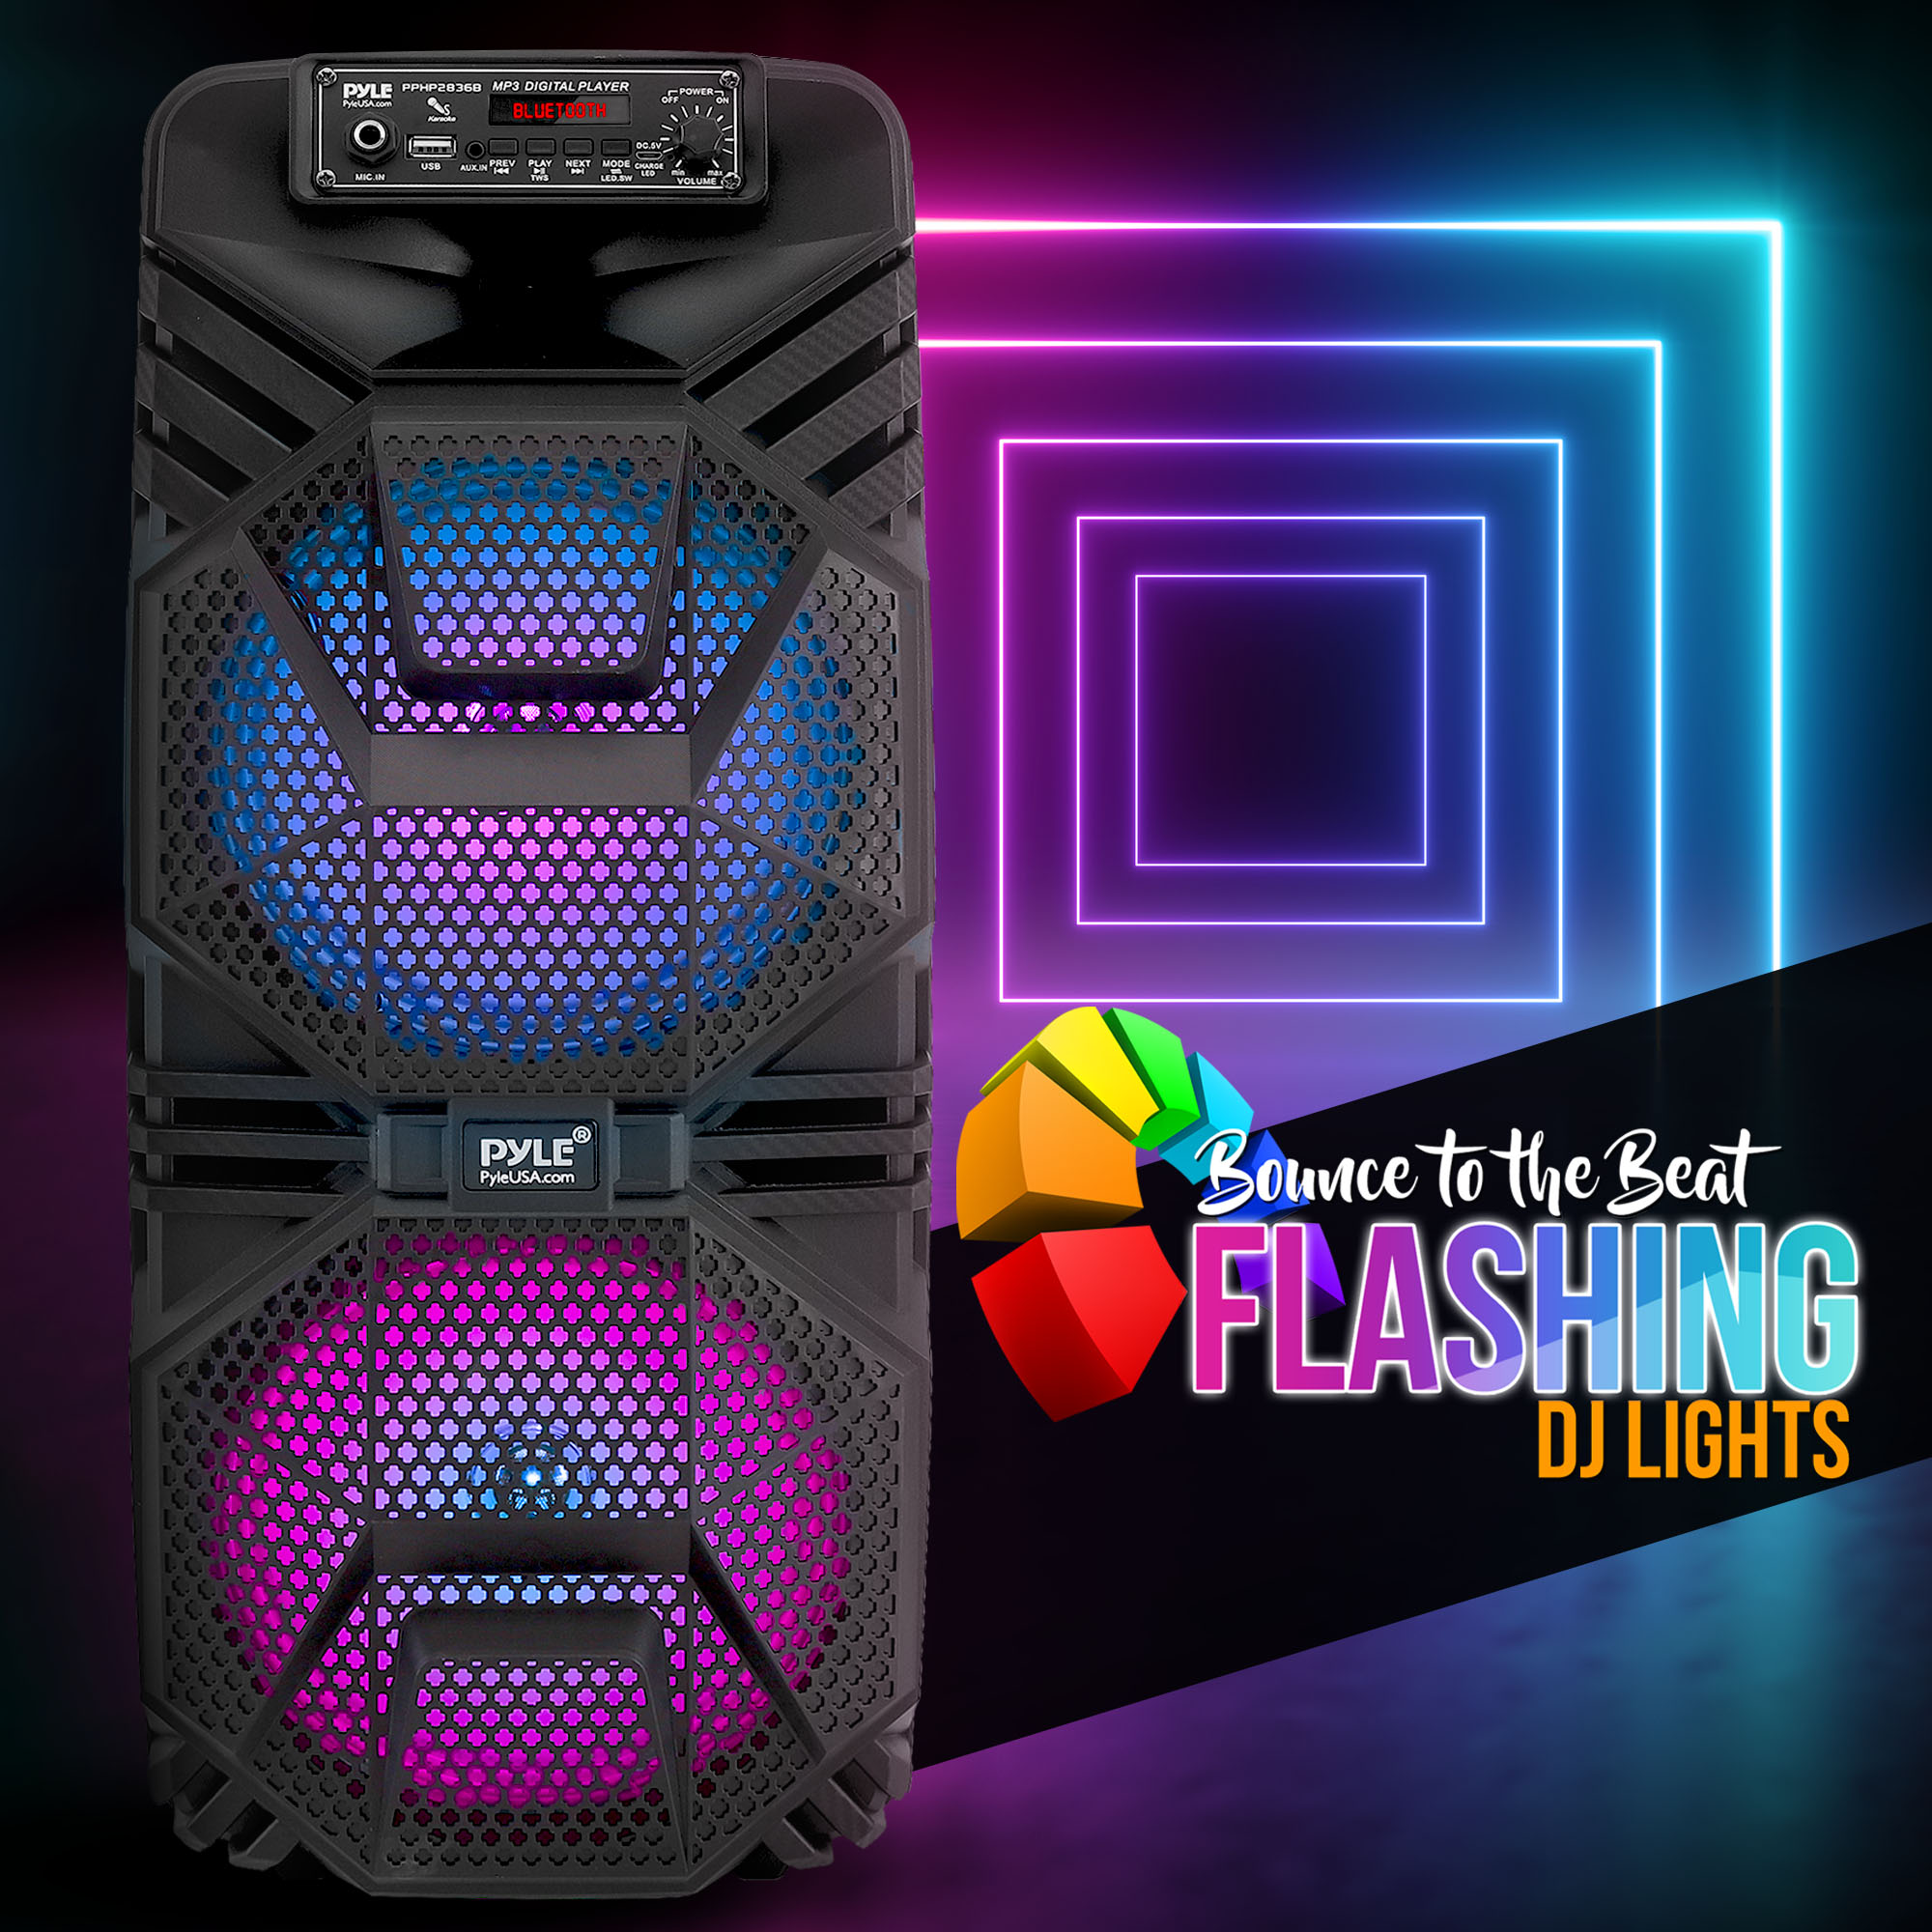 Pyle Dual 8’’ Bluetooth Portable PA Speaker - Portable PA & Karaoke Party Audio Speaker with Built-in Rechargeable Battery, Flashing Party Lights, MP3/USB/ /FM Radio (600 Watt MAX) - image 3 of 3